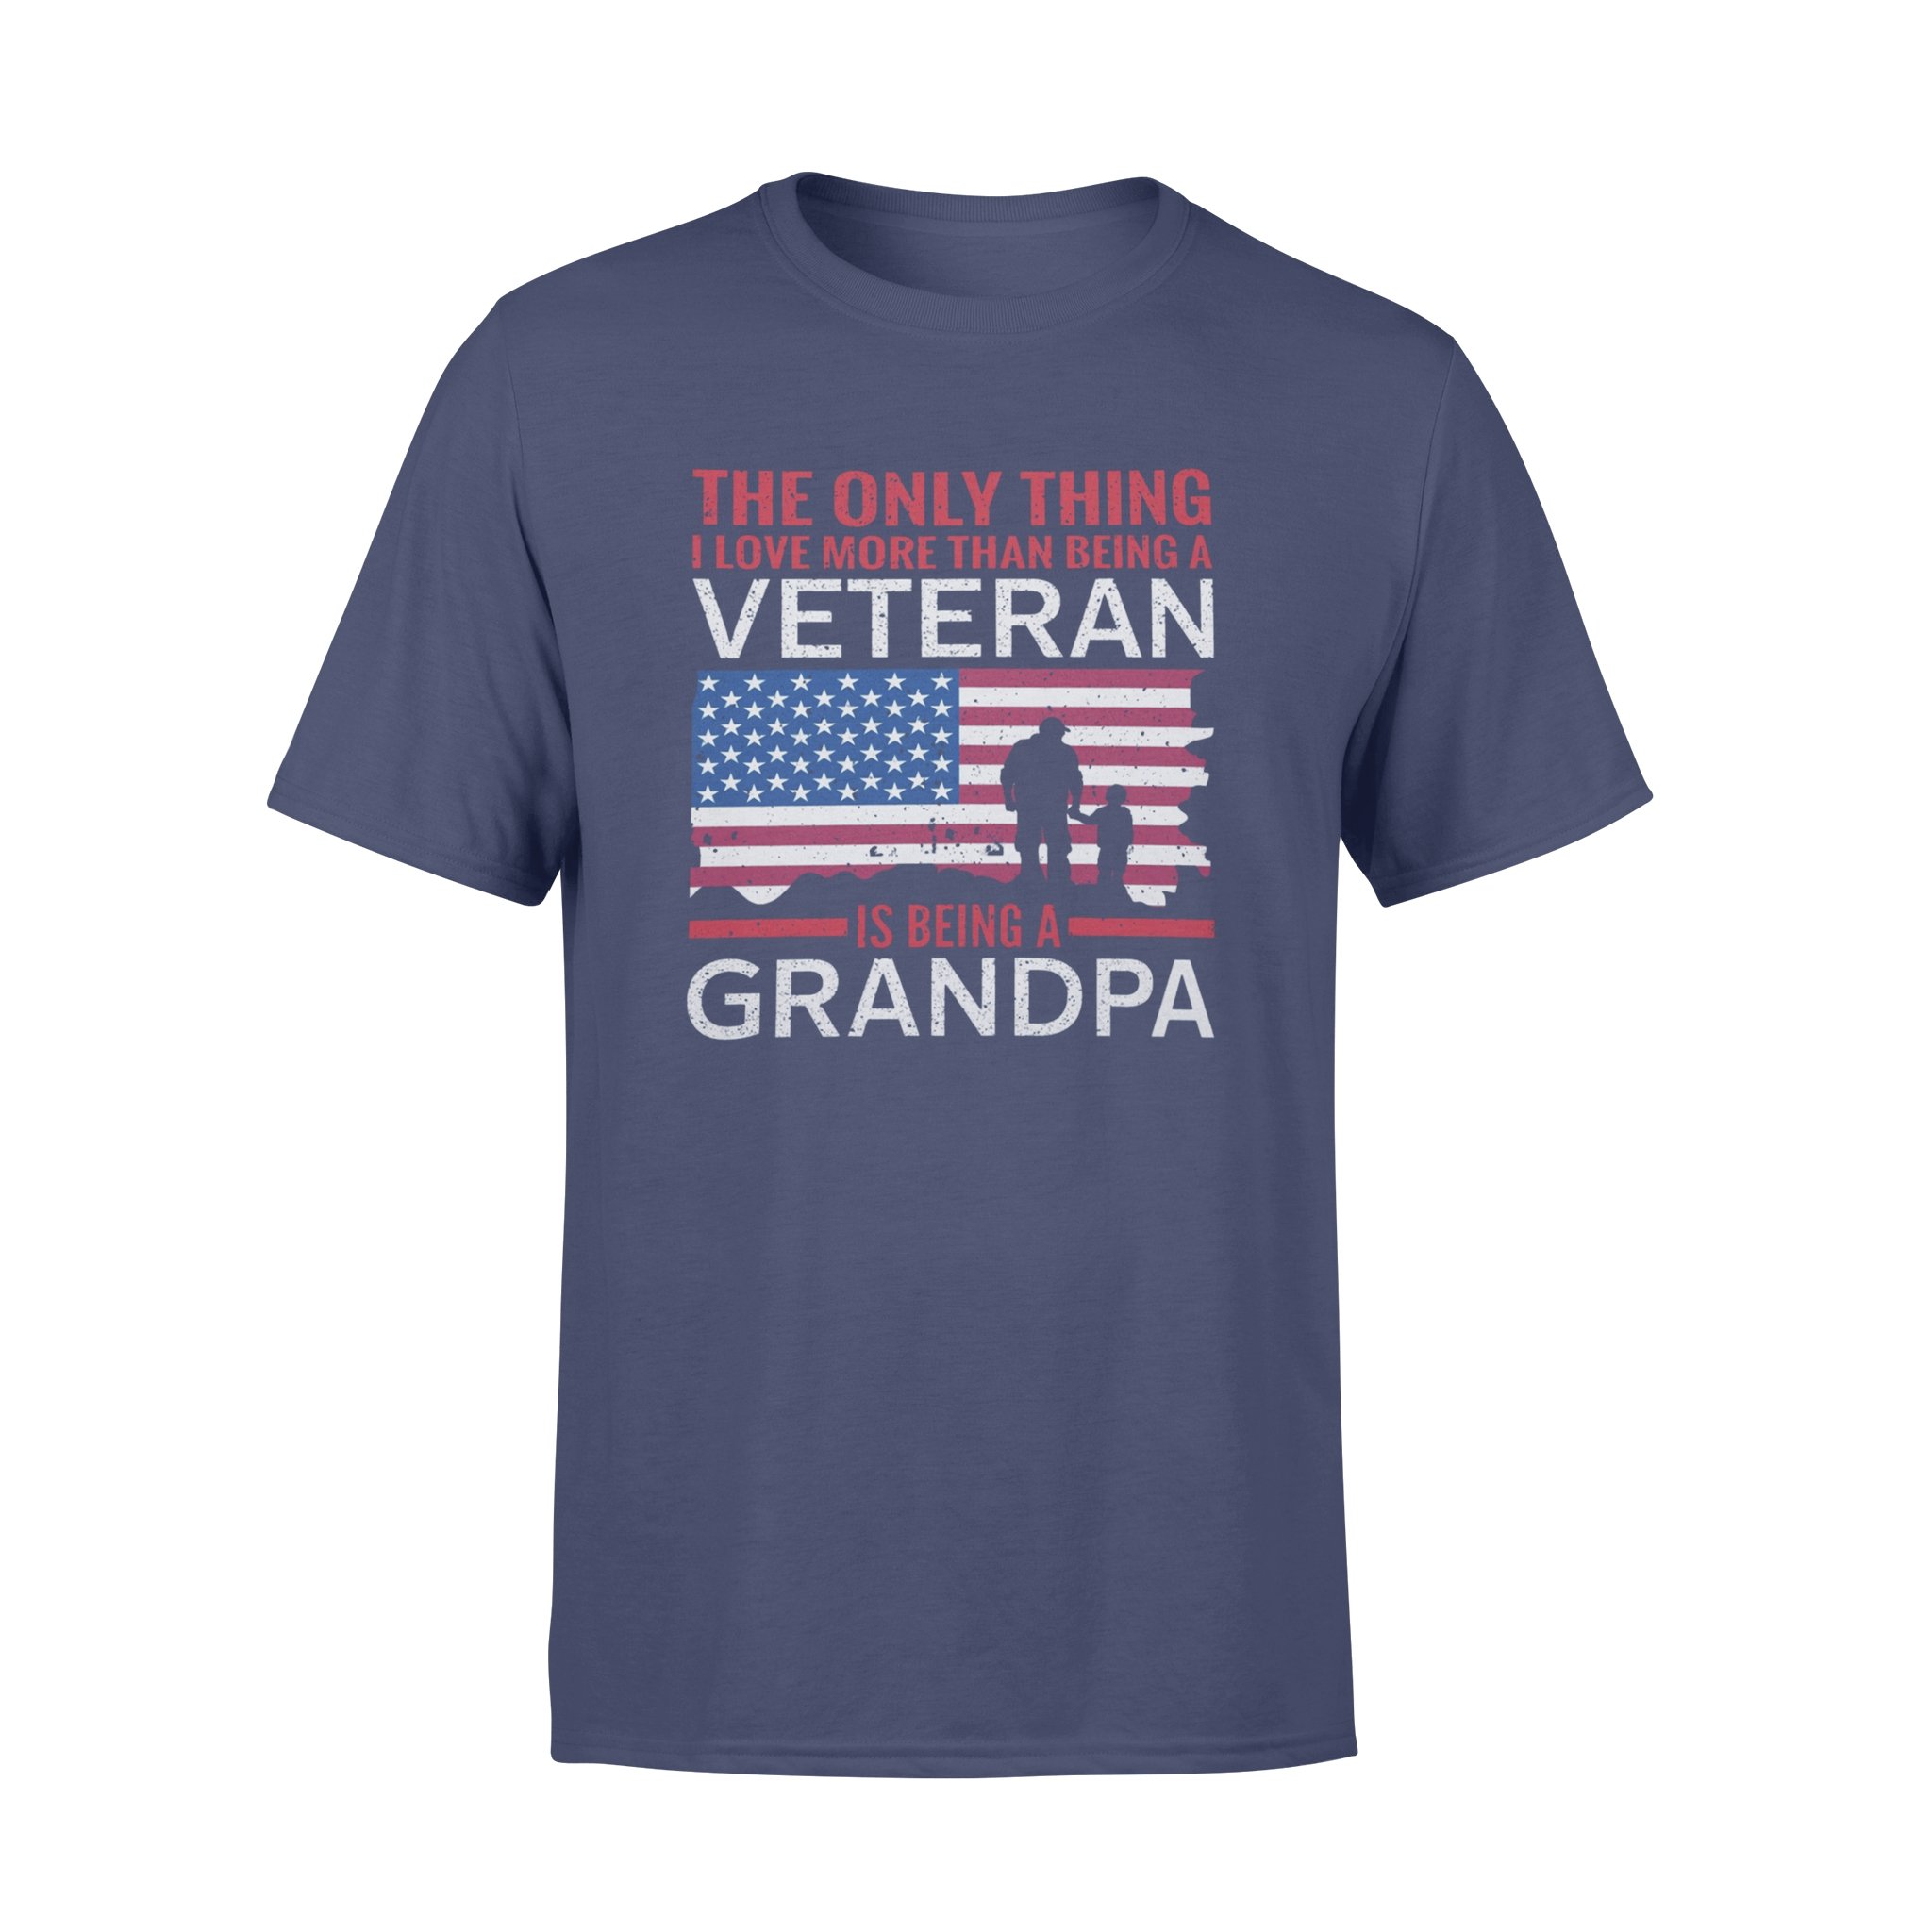 THE ONLY THING I LOVE MORE THAN BEING A VETERAN IS BEING A GRANDPA,  GIFTS FOR GRANDPA,GRANDPA SHIRT,GRANDPA GIFTS,FATHER?S DAY GIFT,PLUS SIZE SHIRT 1 